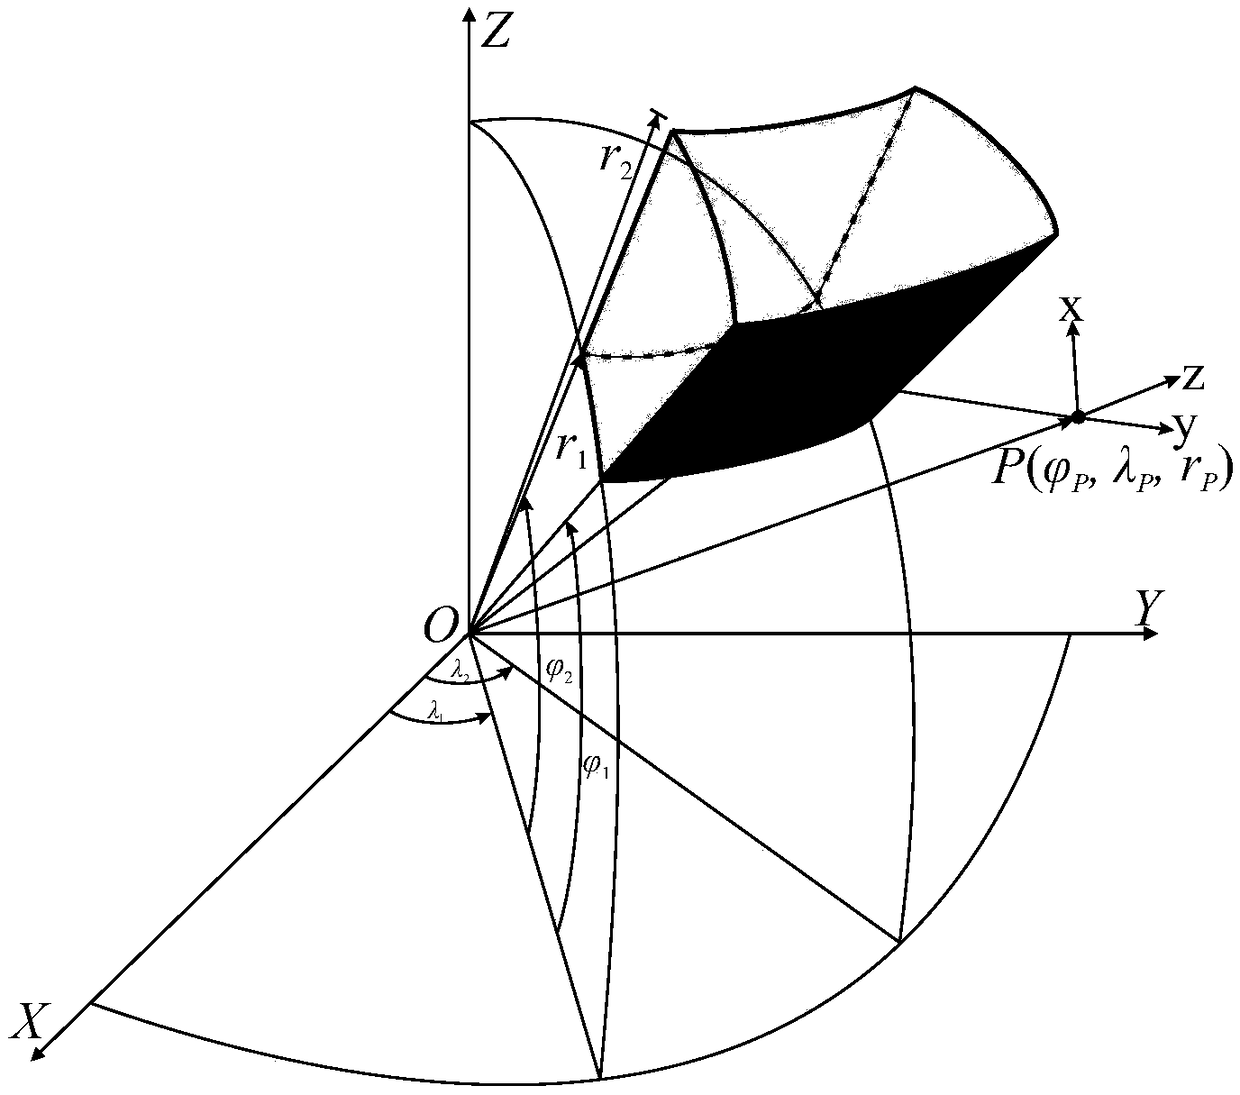 Rapid high-precision gravity field forward-modeling method in spherical coordinate system